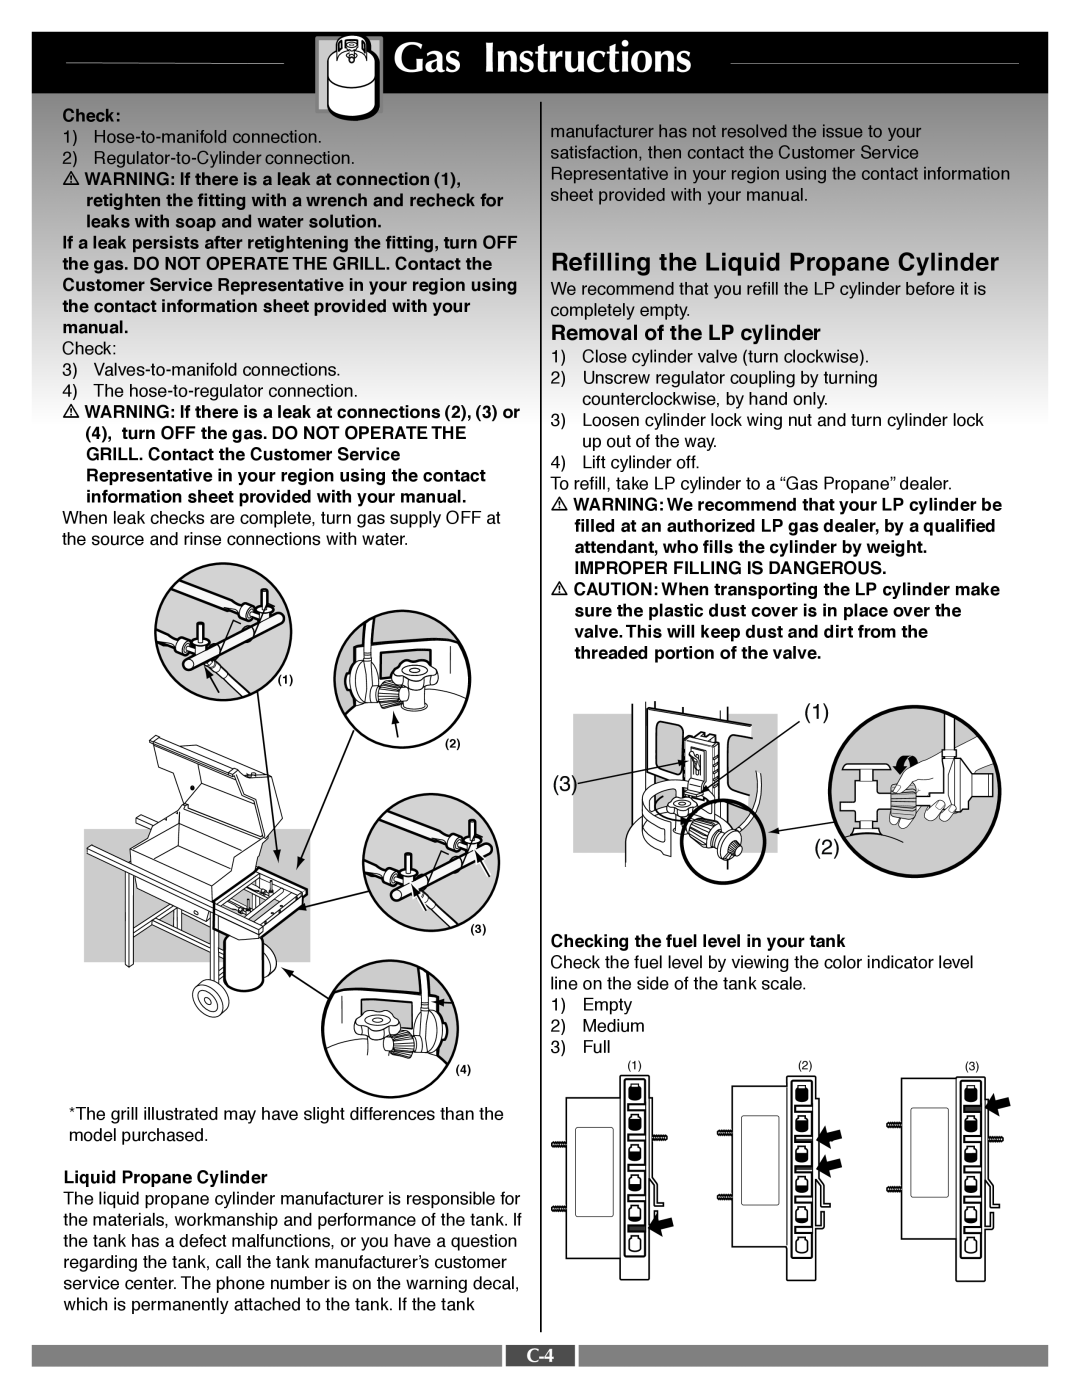 Weber 55545 manual Refilling the Liquid Propane Cylinder, Removal of the LP cylinder, Gas Instructions, CC--4 